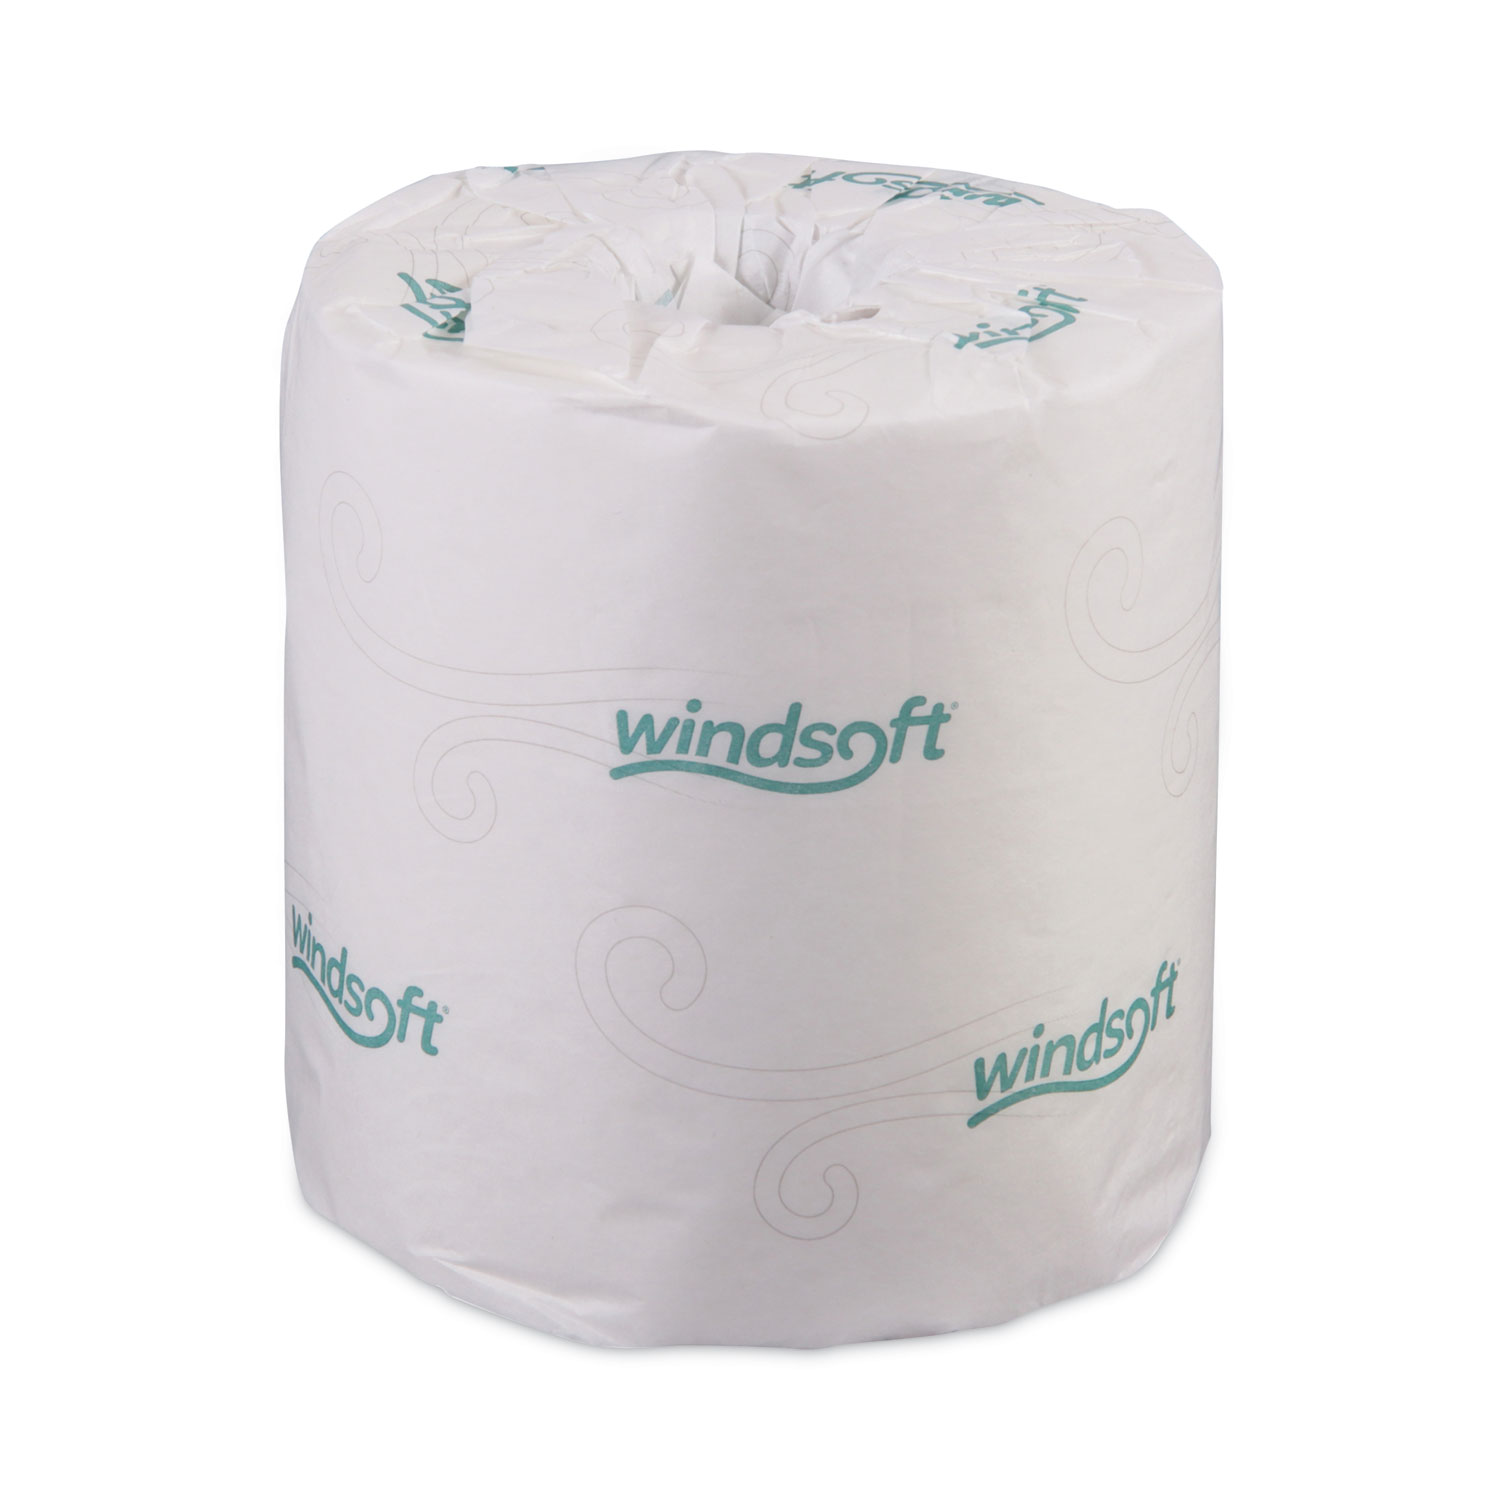 Commercial 2-Ply White Ultra Plus Individually Wrapped Toilet Paper, Septic  Safe, Compatible with Standard Dispensers